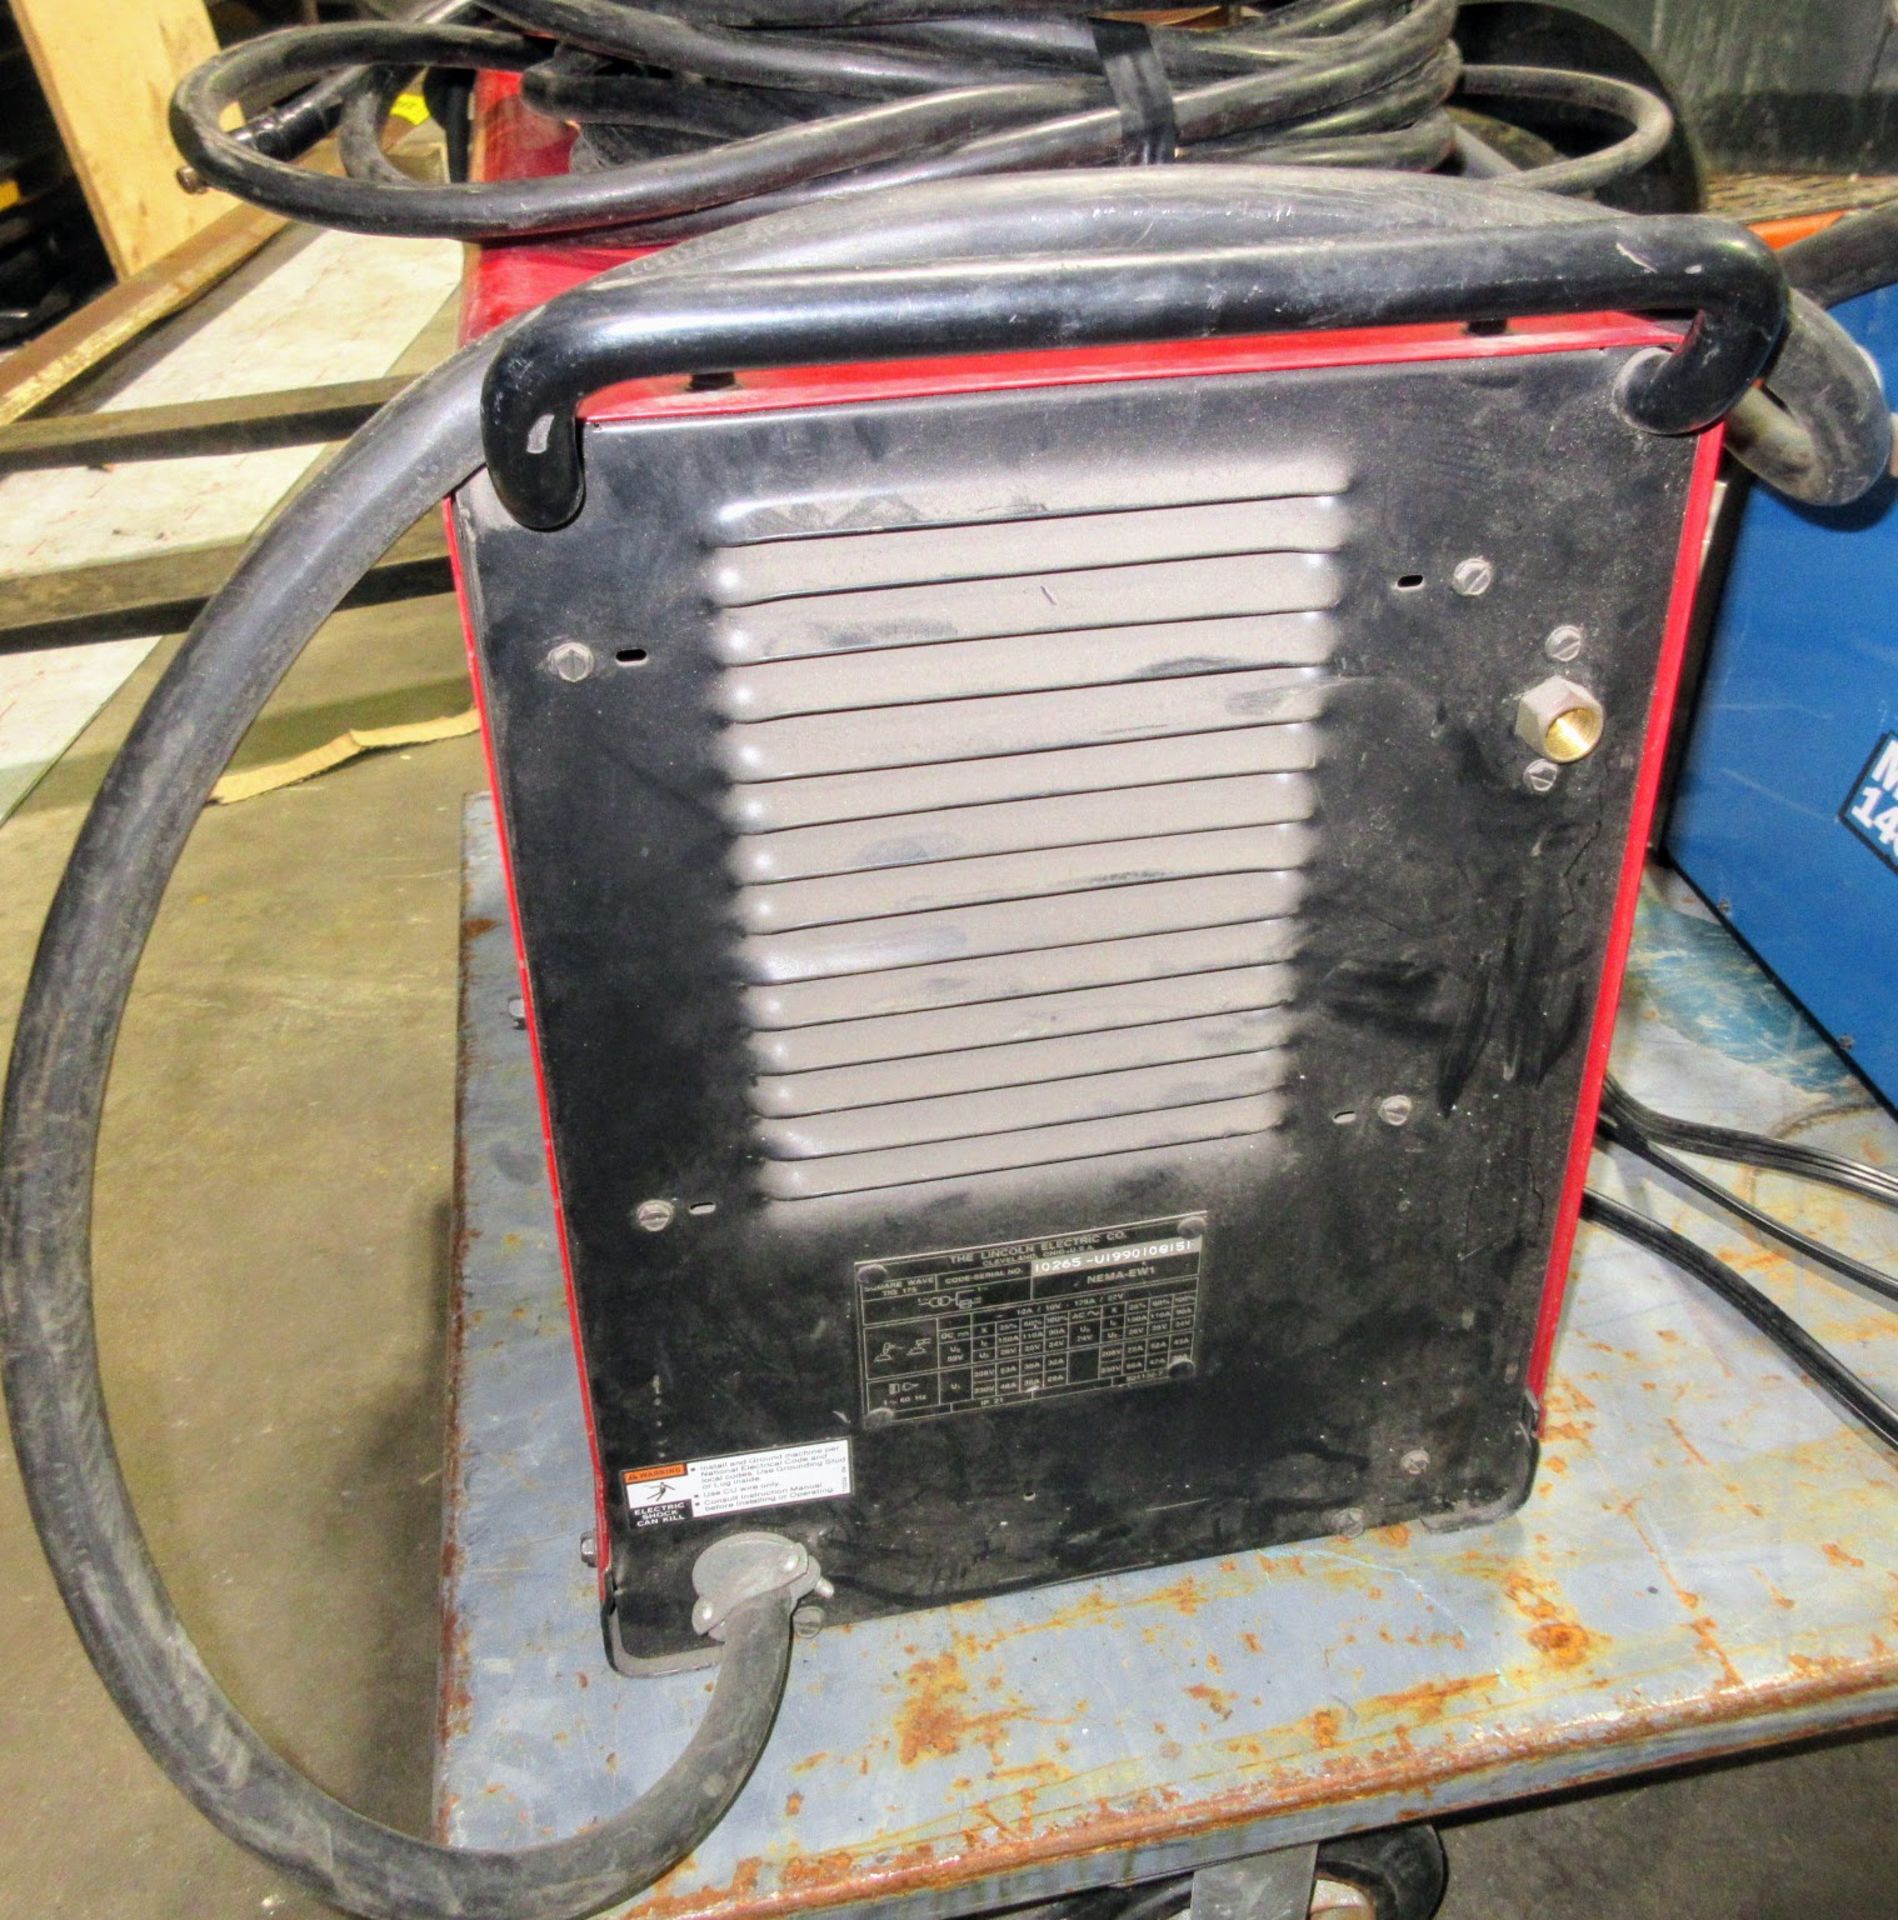 LINCOLN ELECTRIC SQUAREWAVE TIG 175 WELDER W/ CABLES - Image 4 of 4